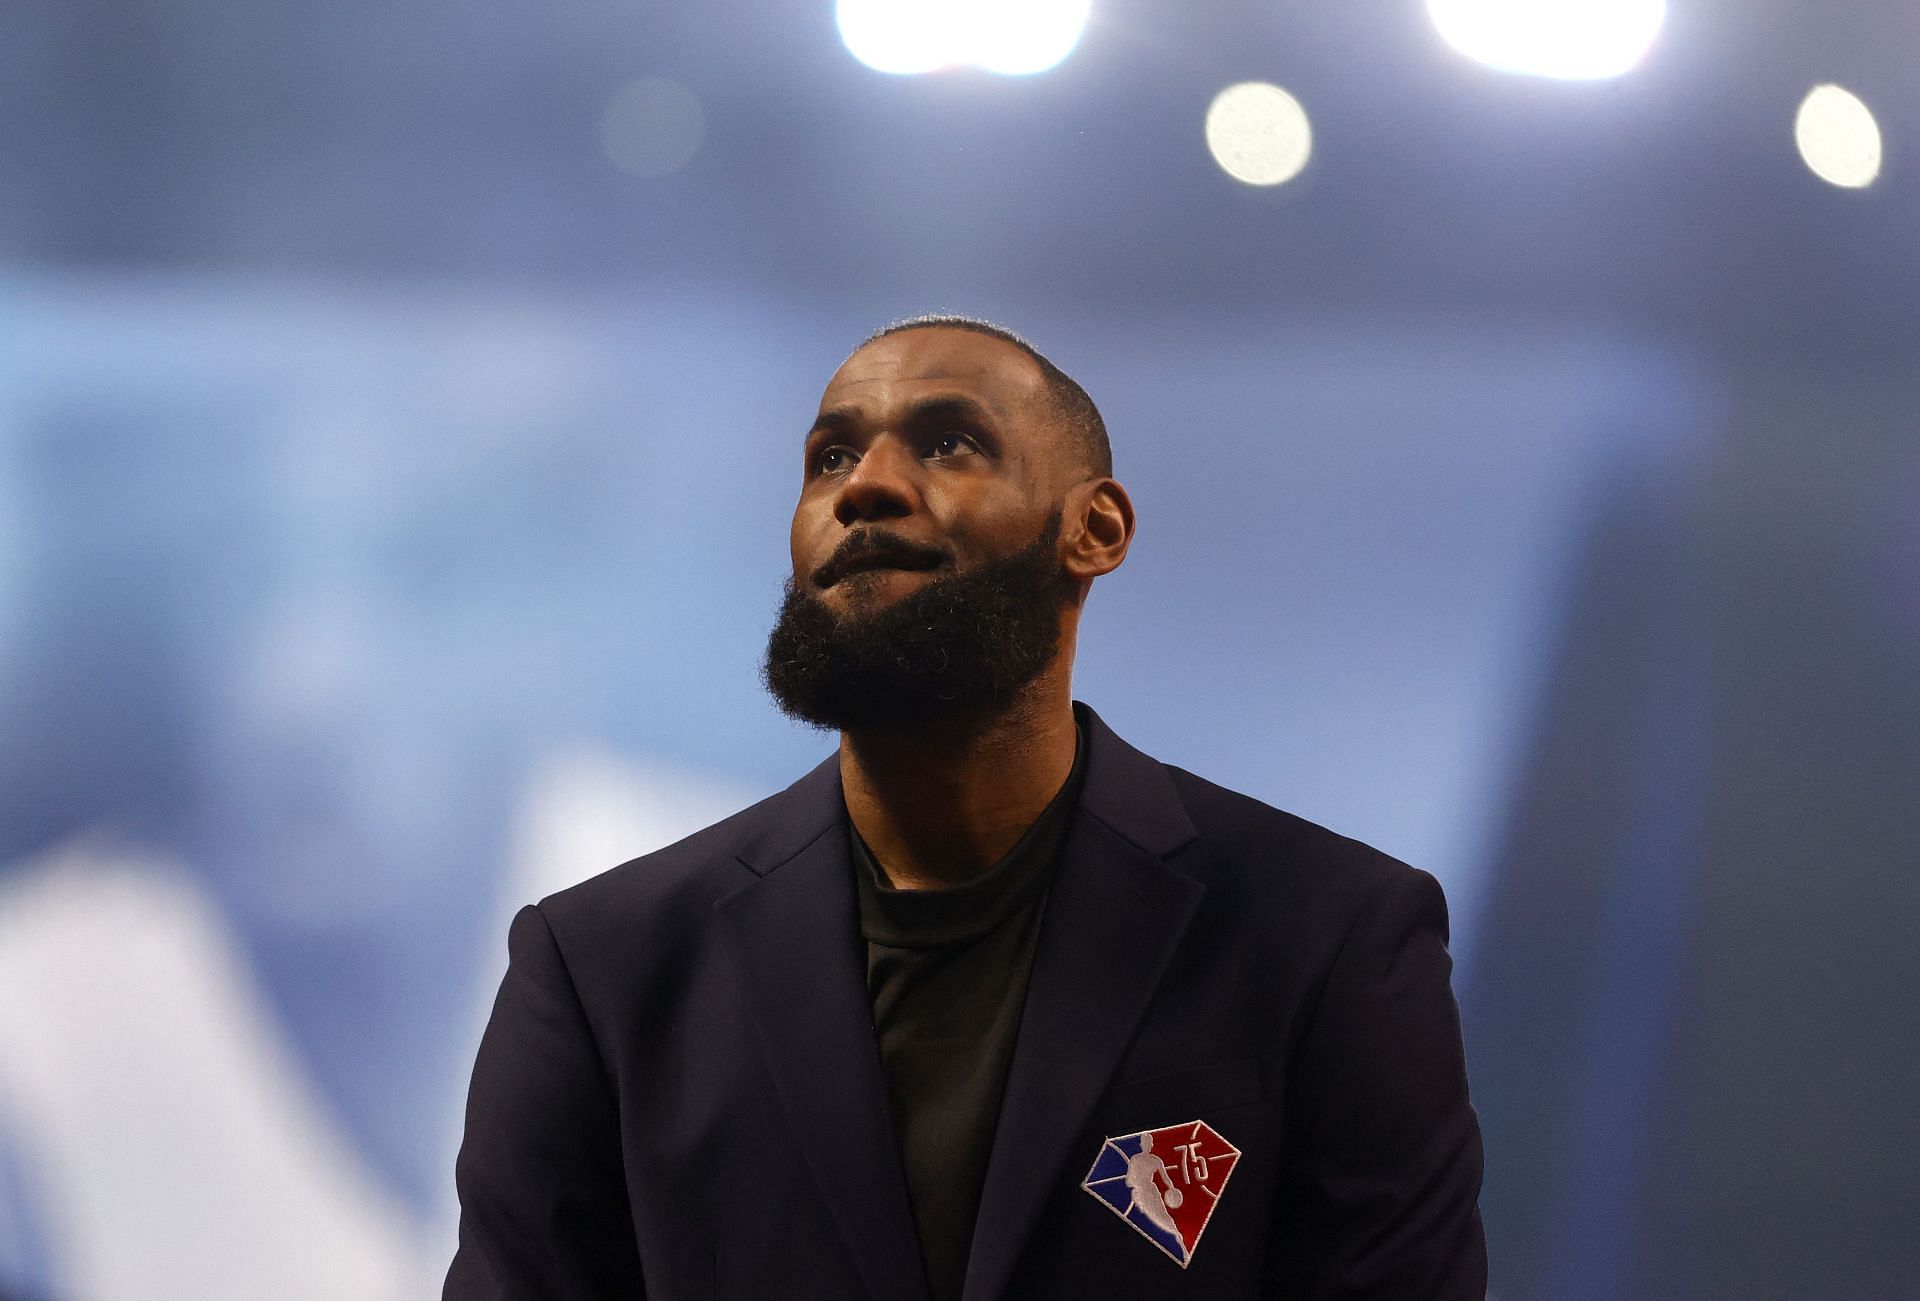 LeBron James reacts after being introduced as part of the NBA 75th Anniversary Team during the NBA All-Star Game at Rocket Mortgage Fieldhouse on Sunday in Cleveland, Ohio.